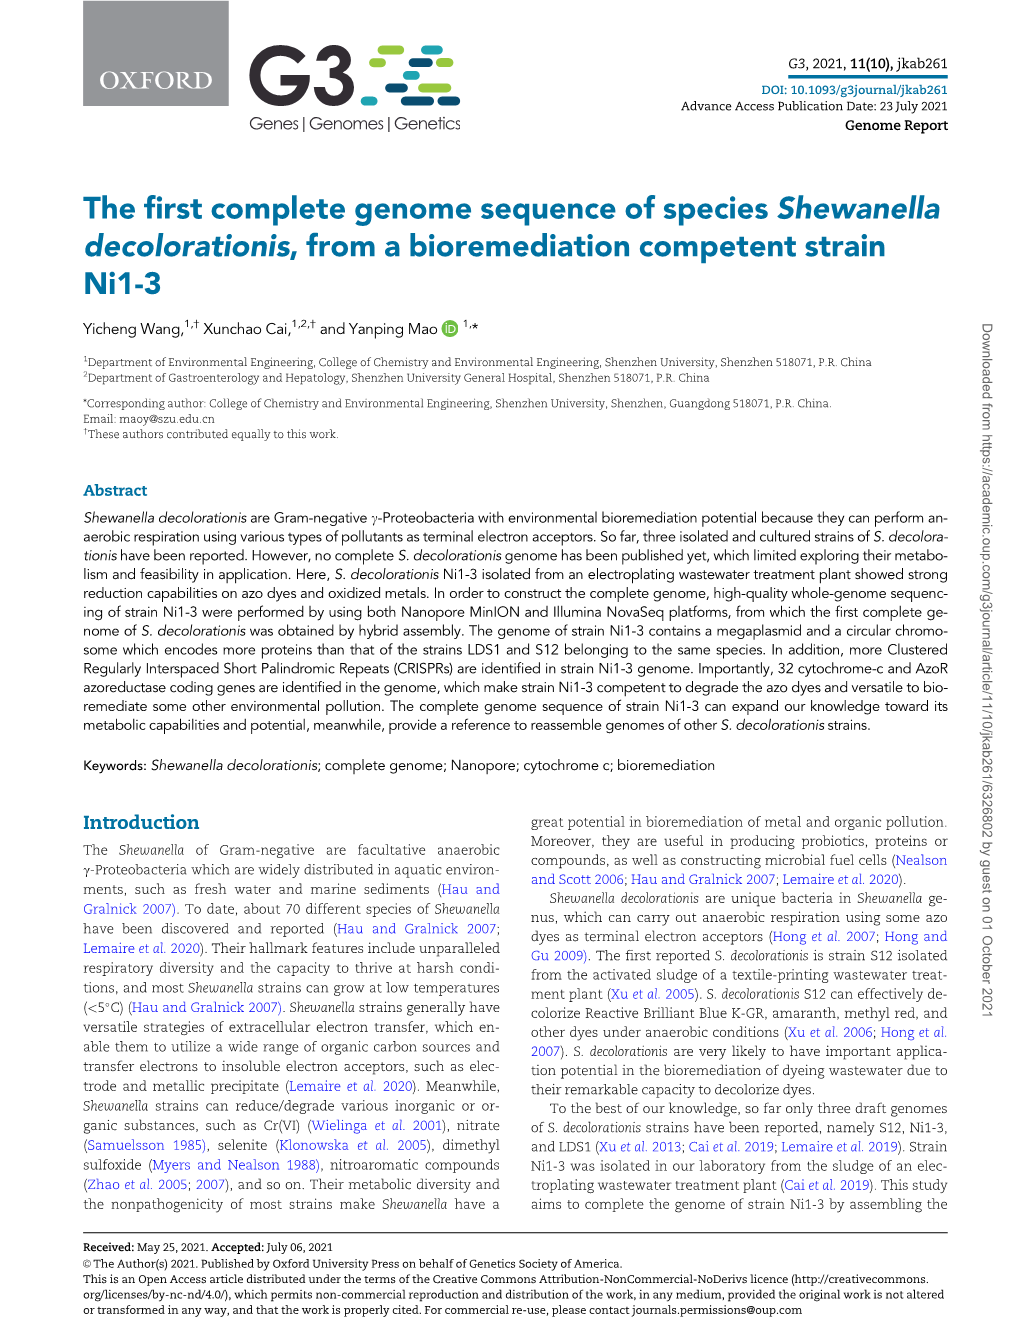 The First Complete Genome Sequence of Species Shewanella Decolorationis, from a Bioremediation Competent Strain Ni1-3